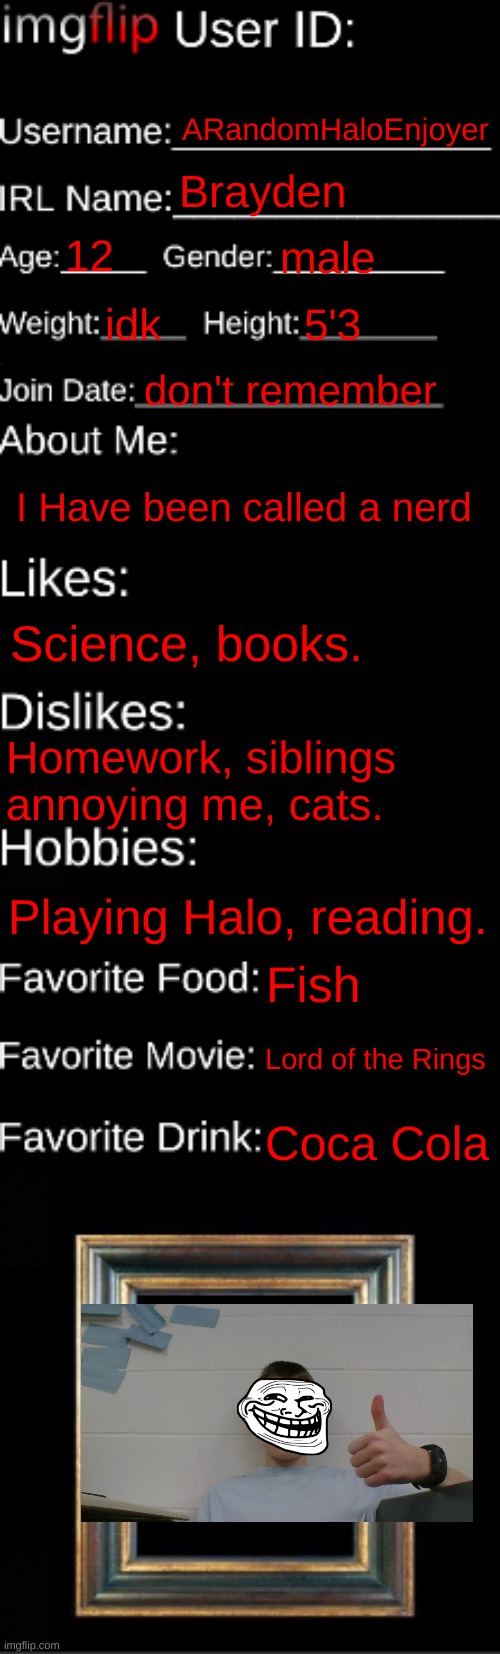 imgflip ID Card | ARandomHaloEnjoyer; Brayden; 12; male; idk; 5'3; don't remember; I Have been called a nerd; Science, books. Homework, siblings annoying me, cats. Playing Halo, reading. Fish; Lord of the Rings; Coca Cola | image tagged in imgflip id card | made w/ Imgflip meme maker